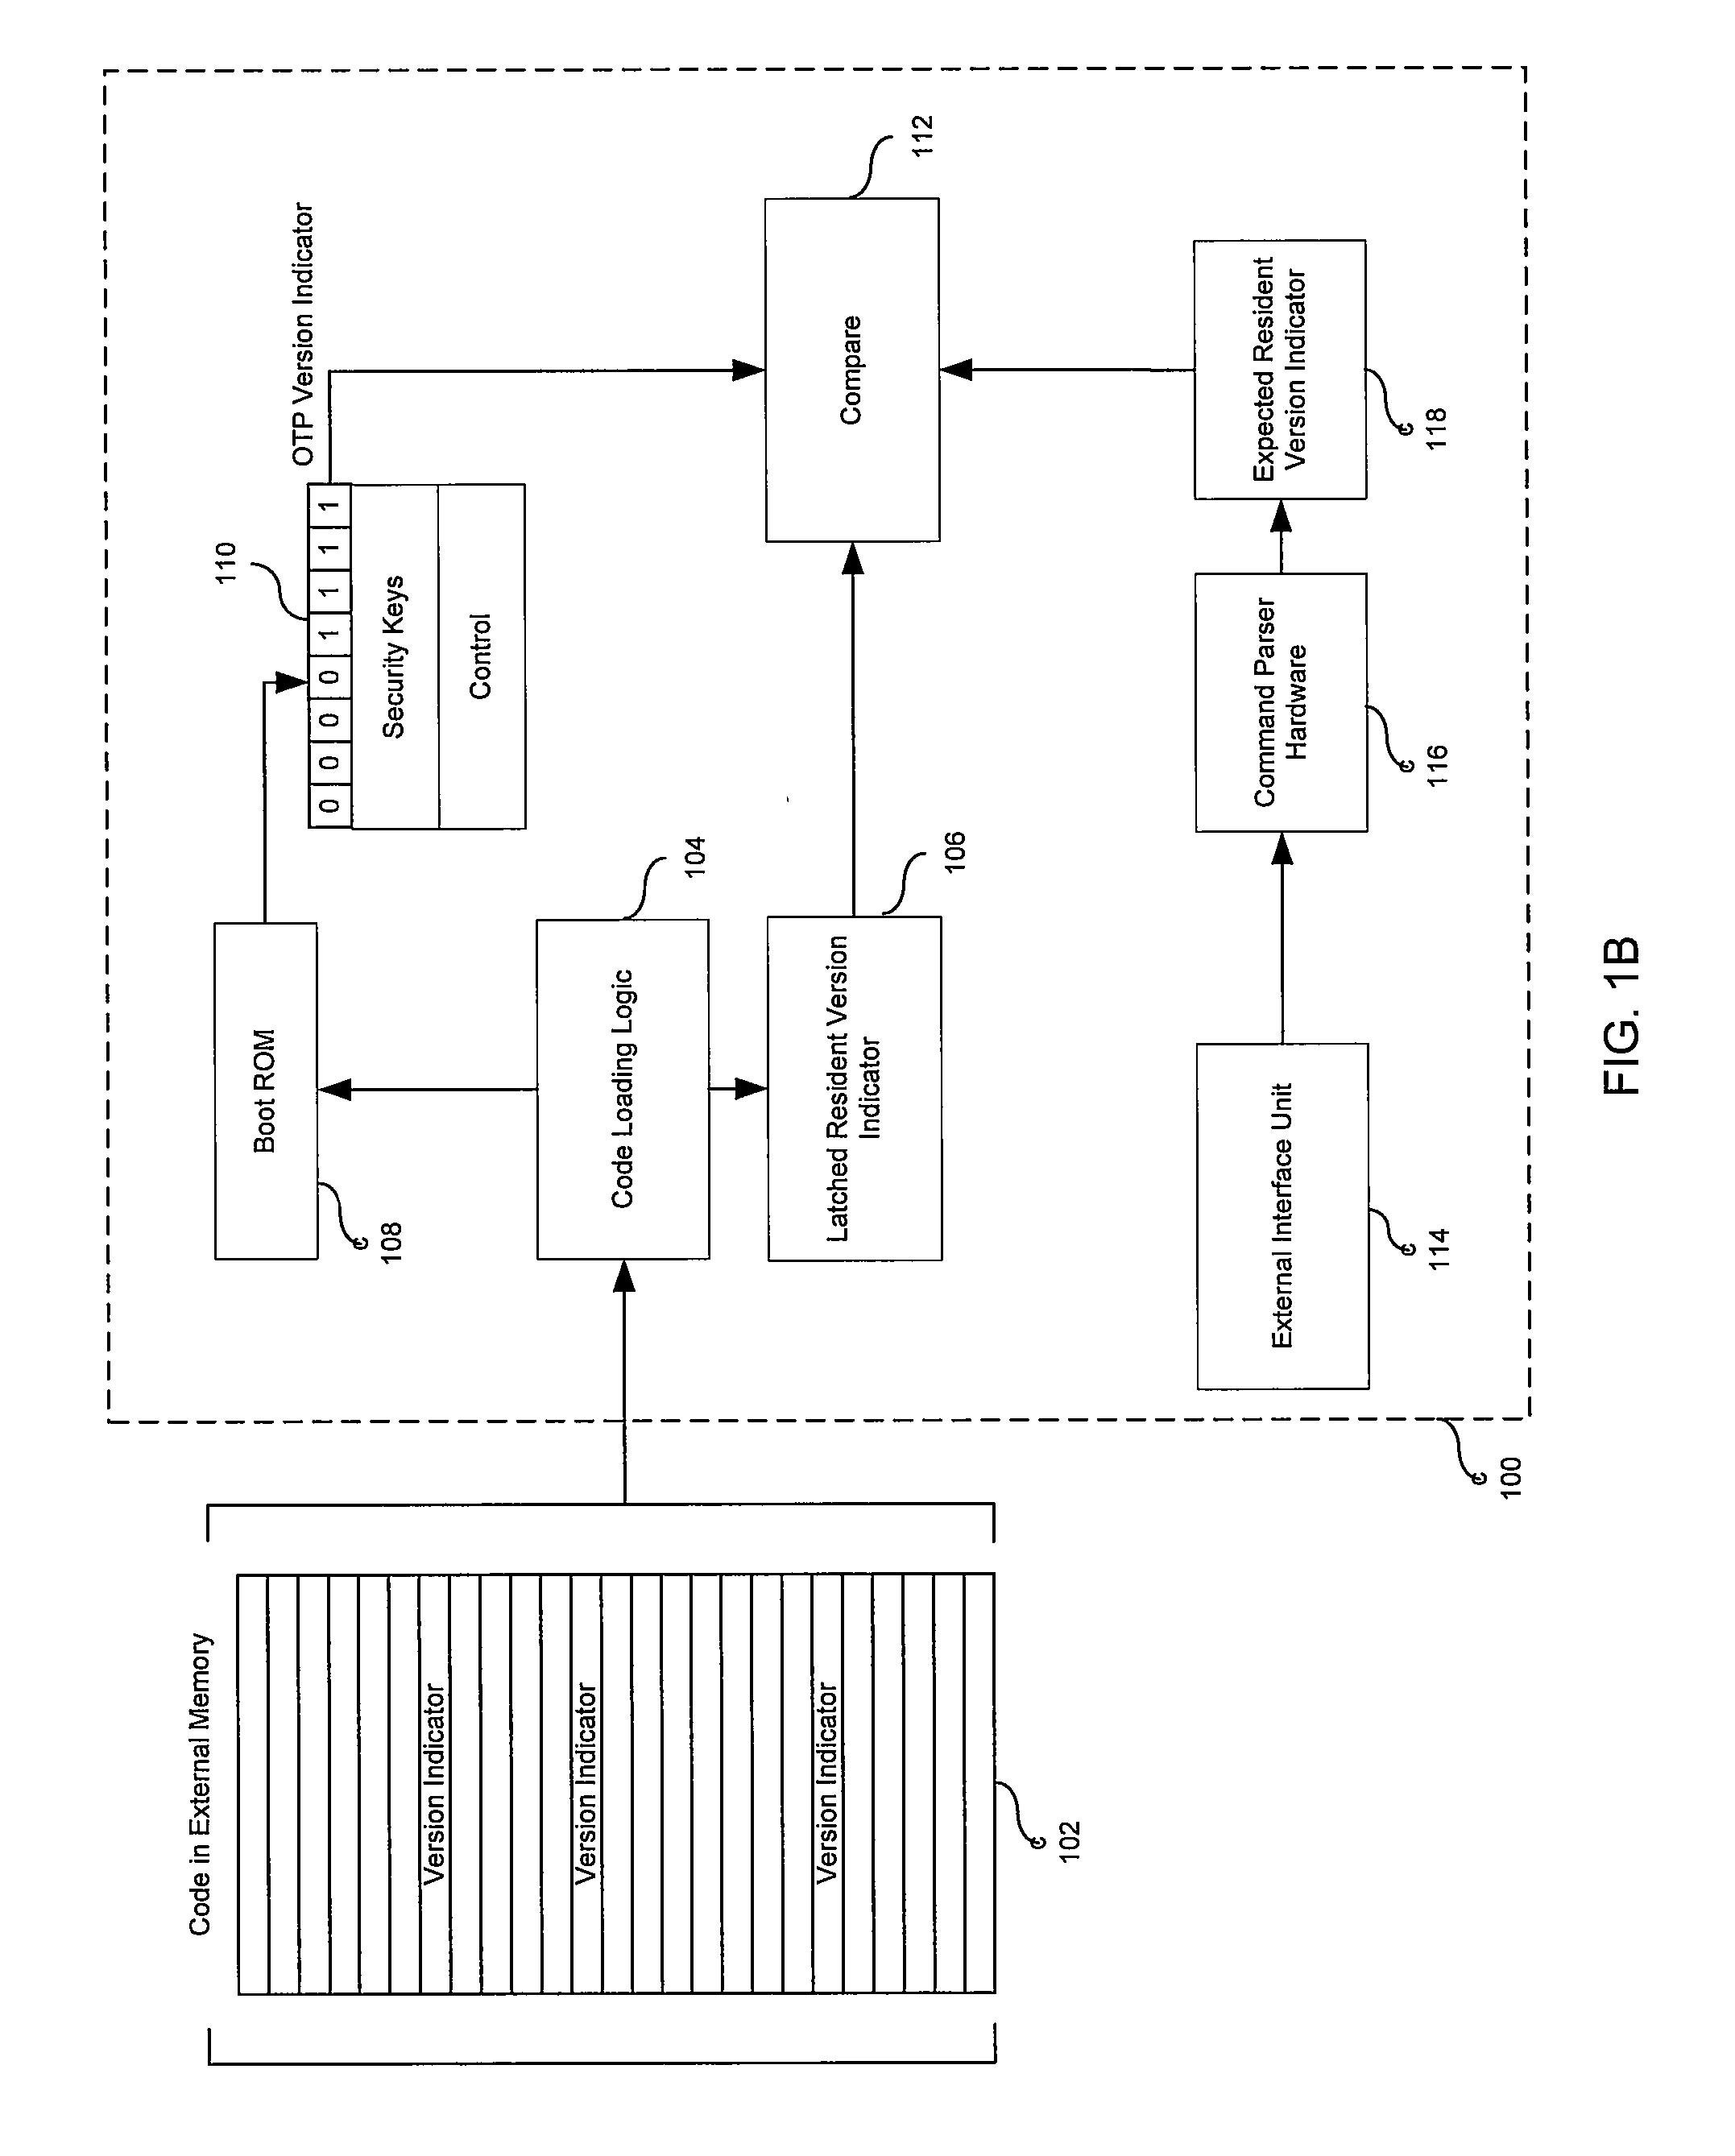 Method And System For Version Control In A Reprogrammable Security System